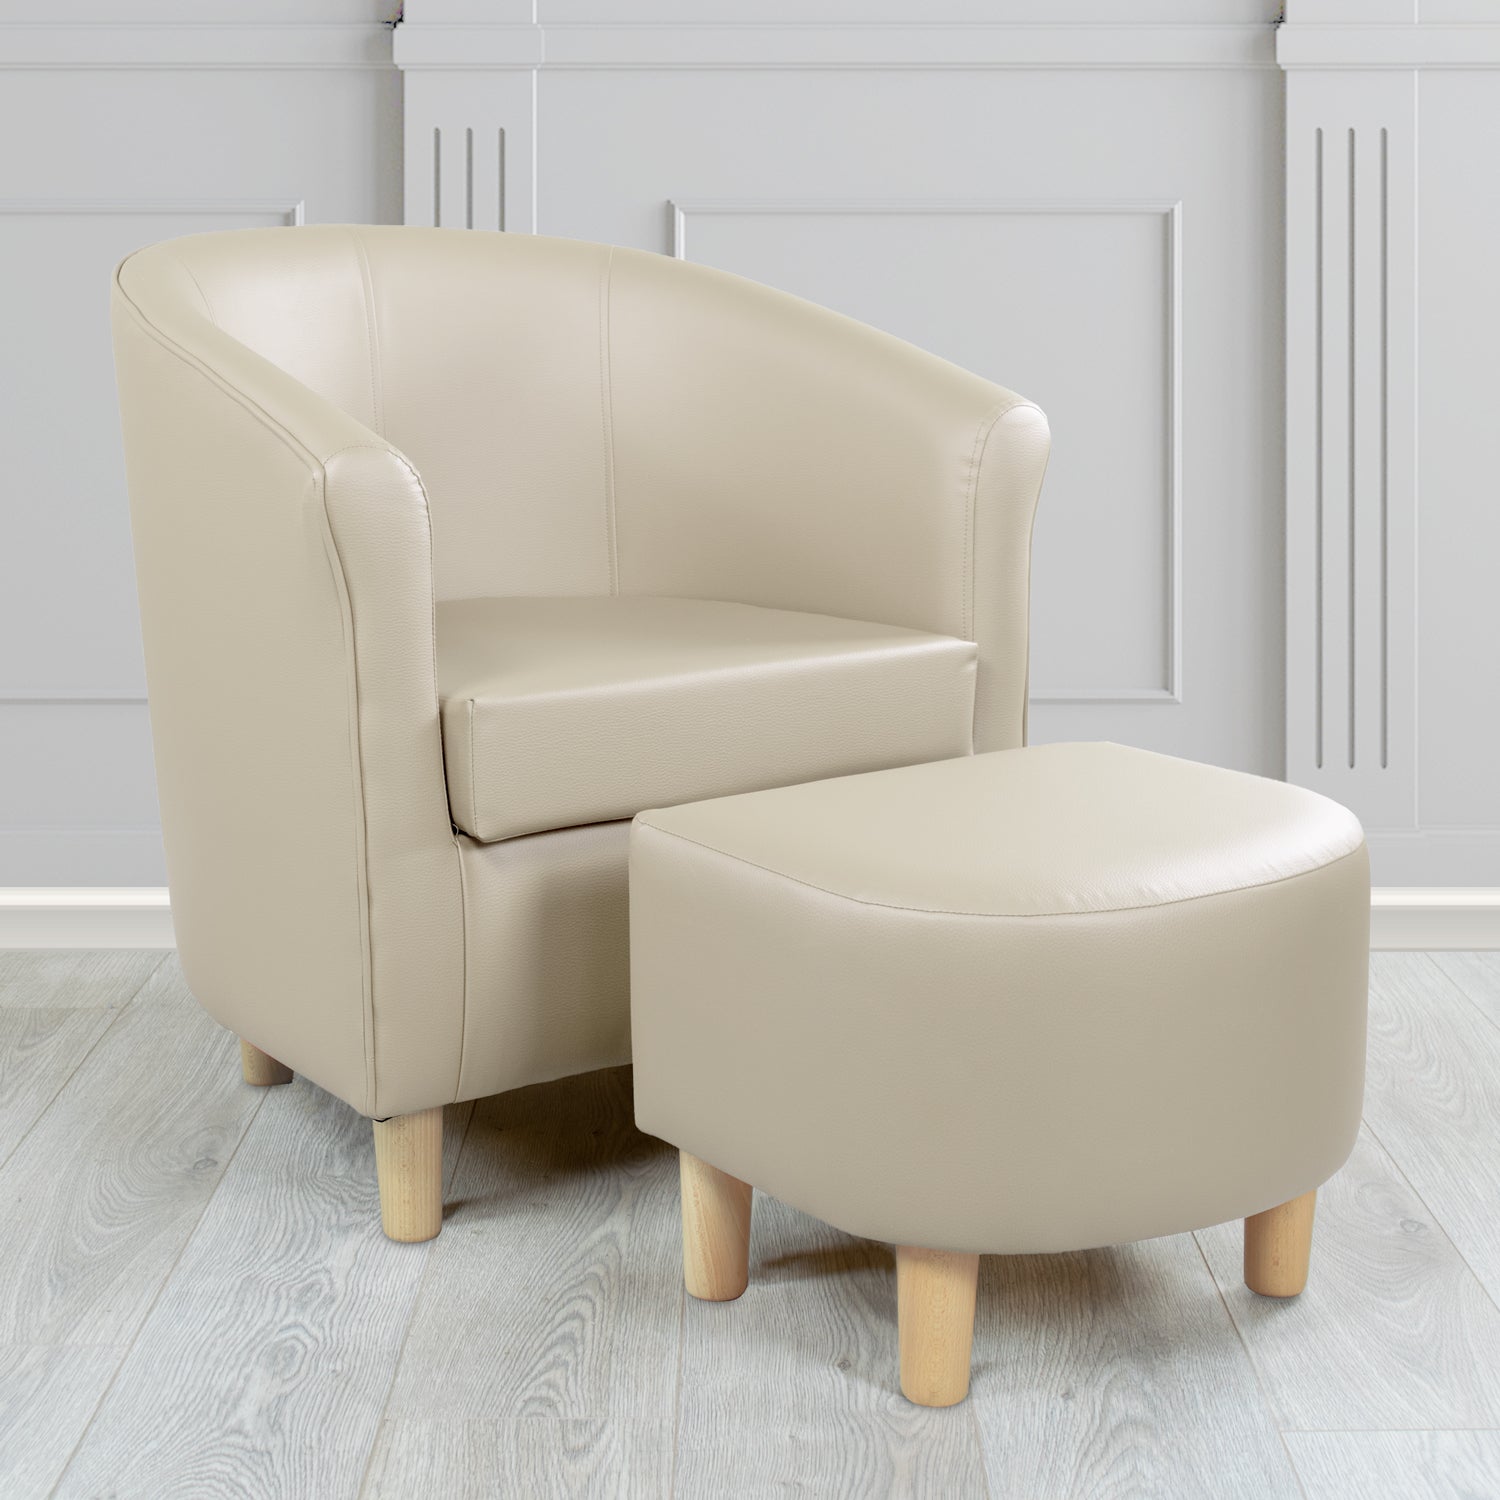 Tuscany Just Colour Dune Faux Leather Tub Chair with Dee Footstool Set - The Tub Chair Shop